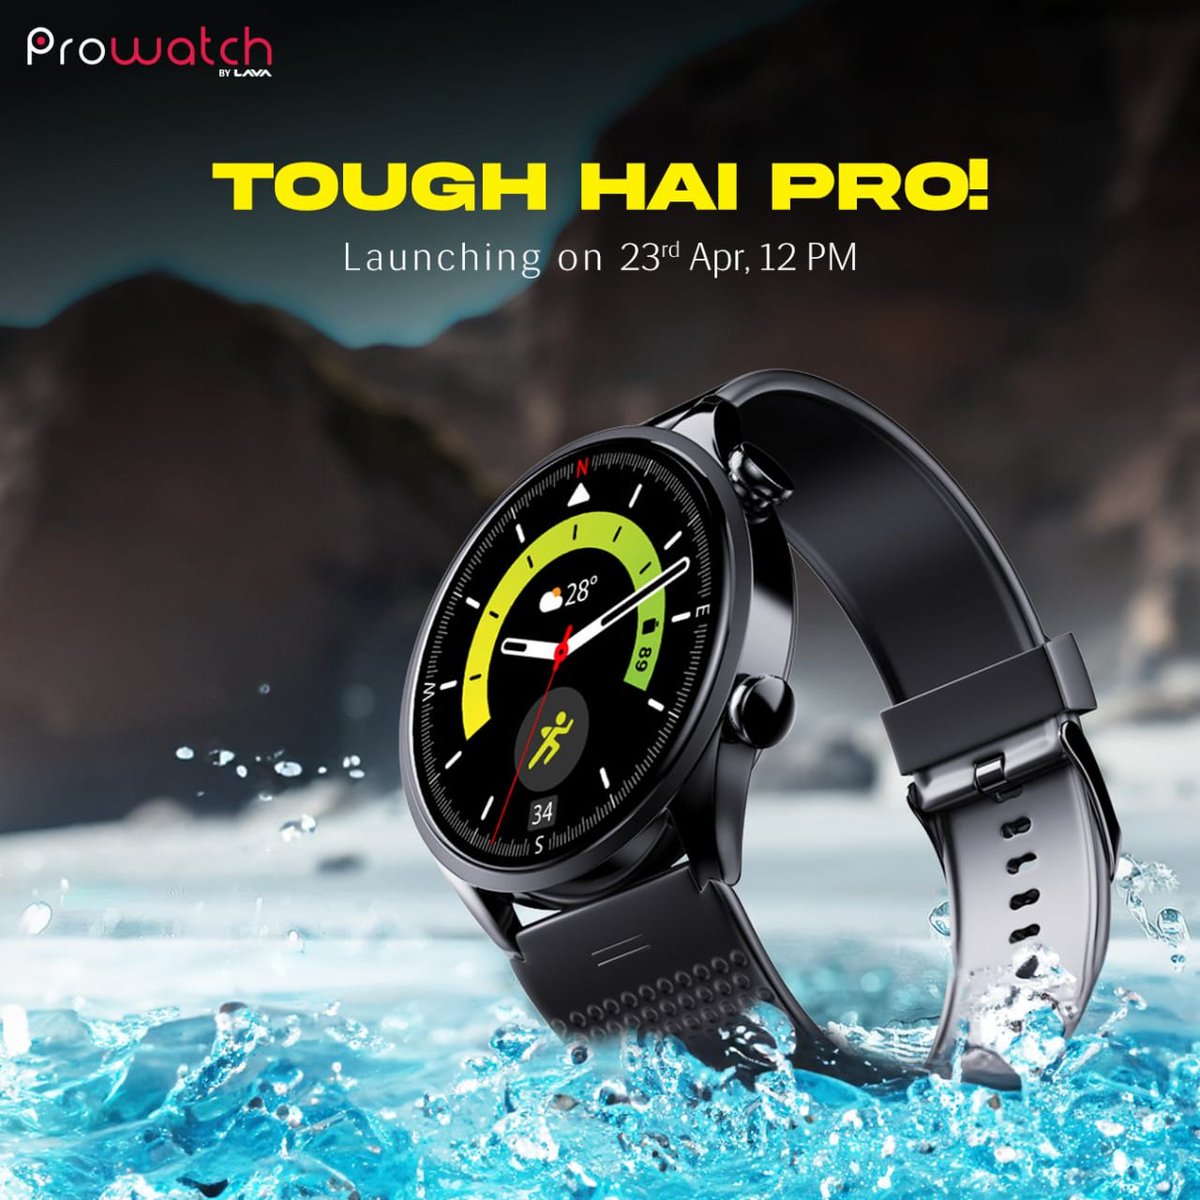 What an mind blowing news that all new Pro watch launching with Gorilla Glass 3 protection and a focus on privacy on  April 23rd . #ProwatchLaunchTomorrow